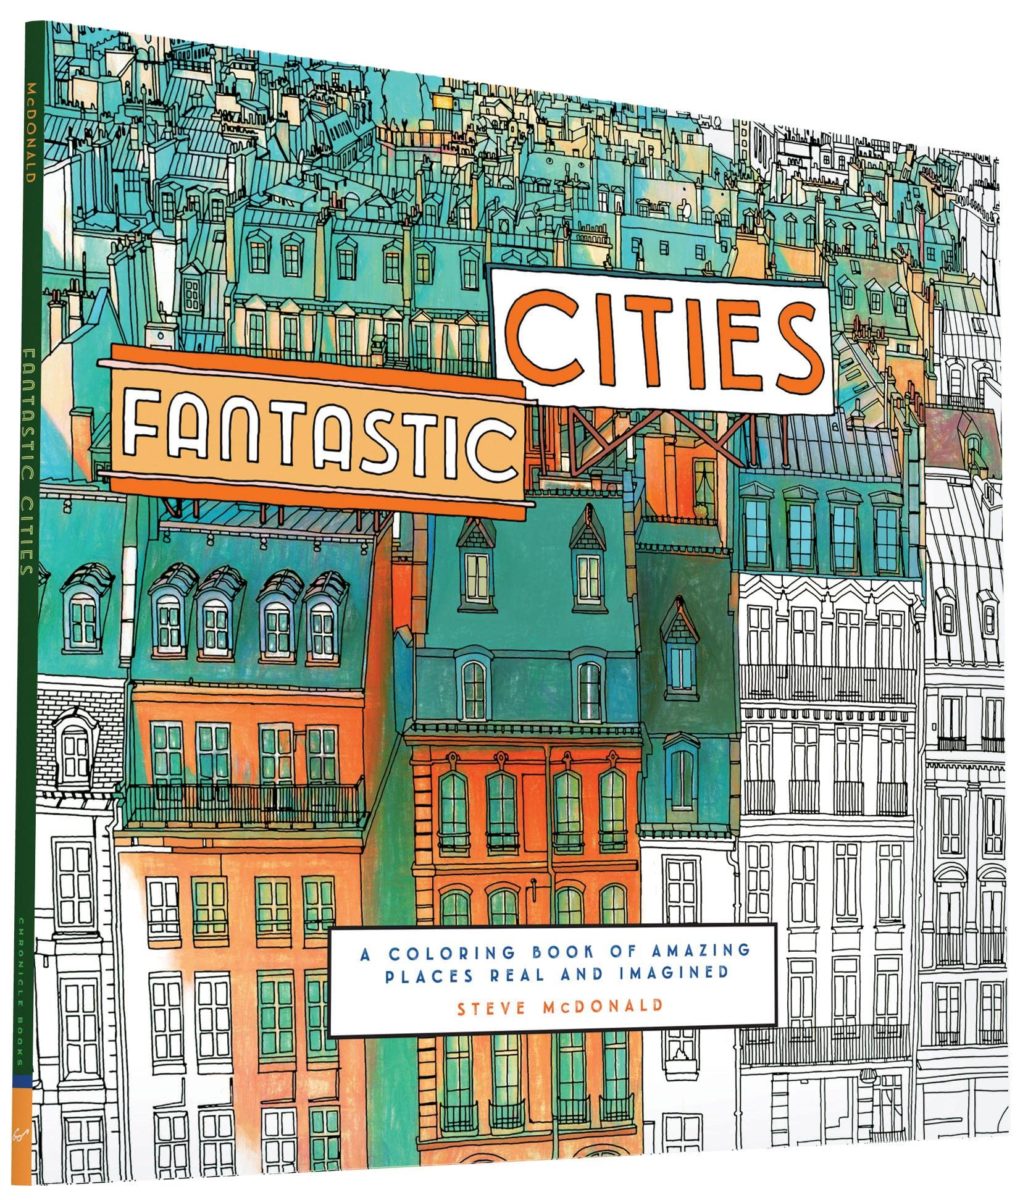 The Best Adult Coloring Books for Escapism and Relaxation